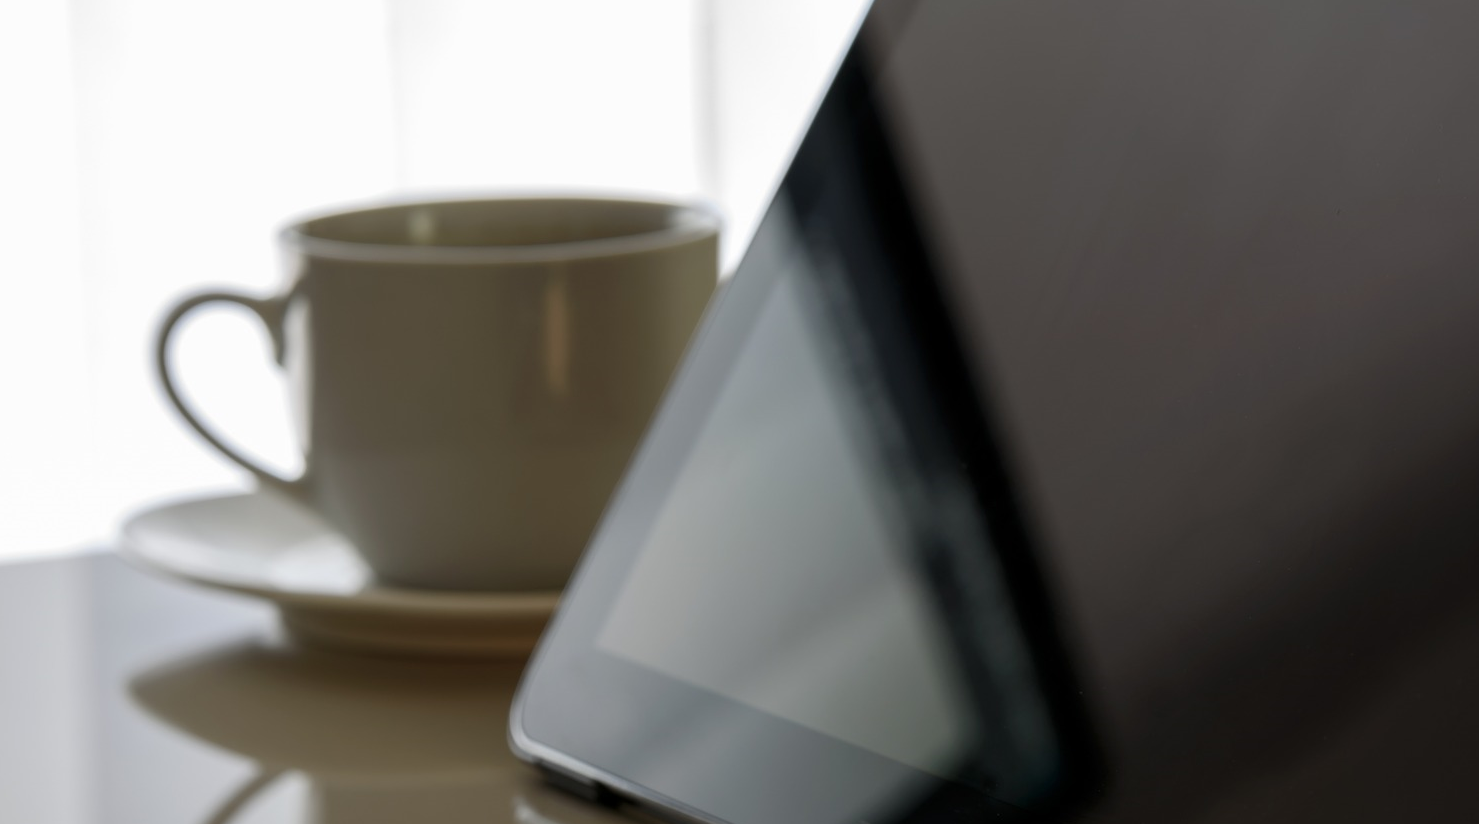 Tablet and tea cup on a desk